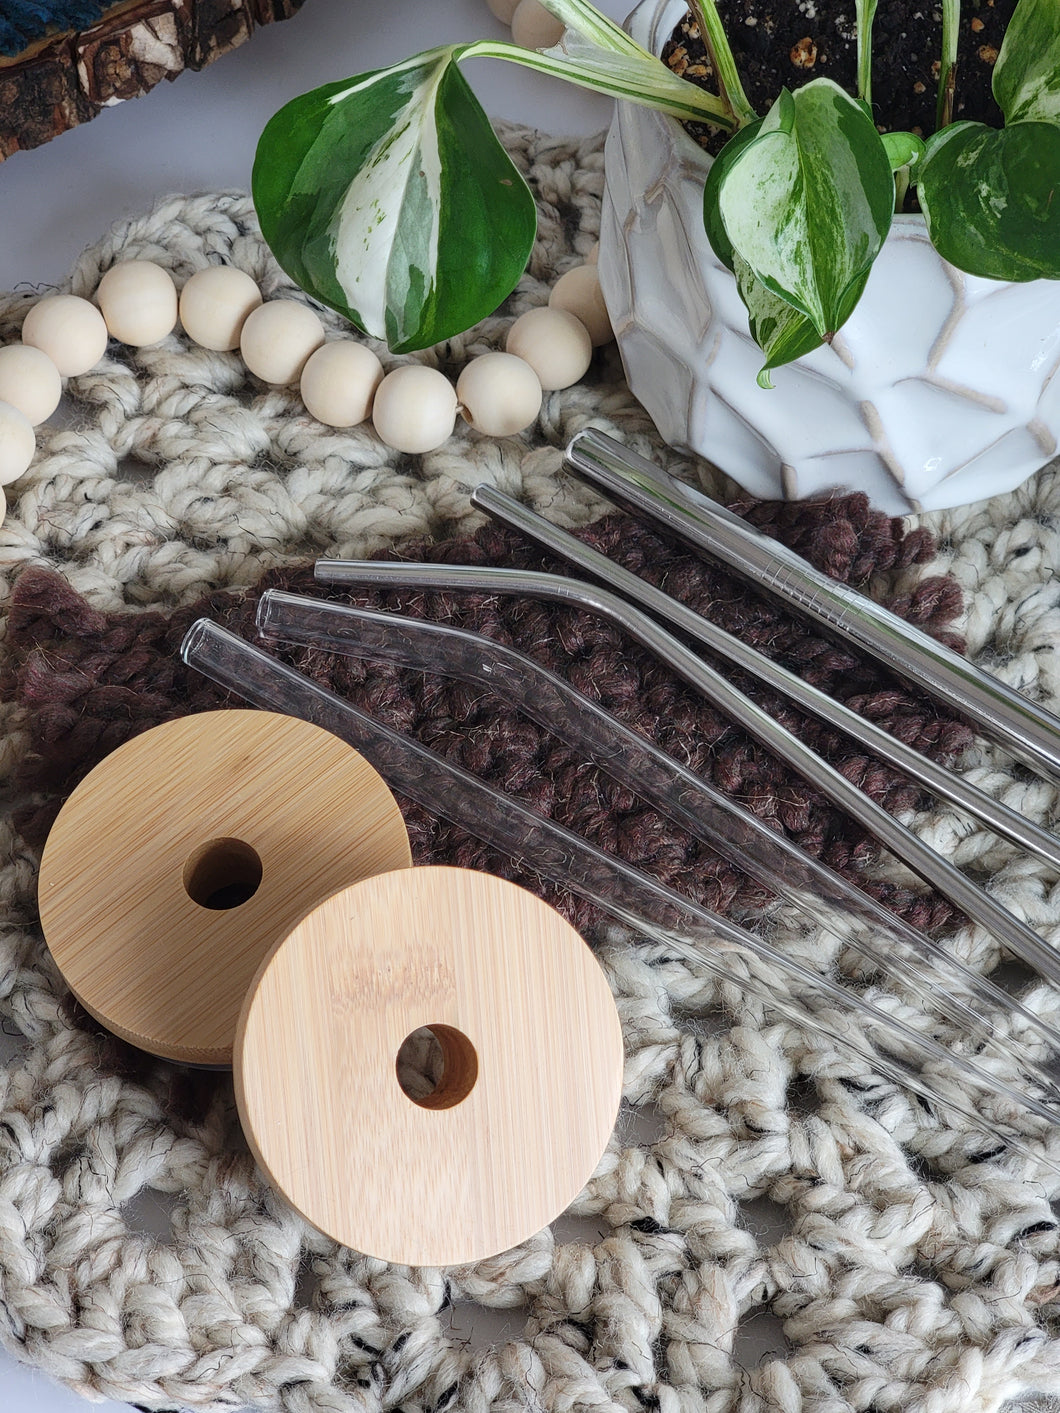 Two bamboo lids shown with glass straw options. Glass straight or bent straw. Metal straight or bent straw, or metal boba/bubble tea straw.